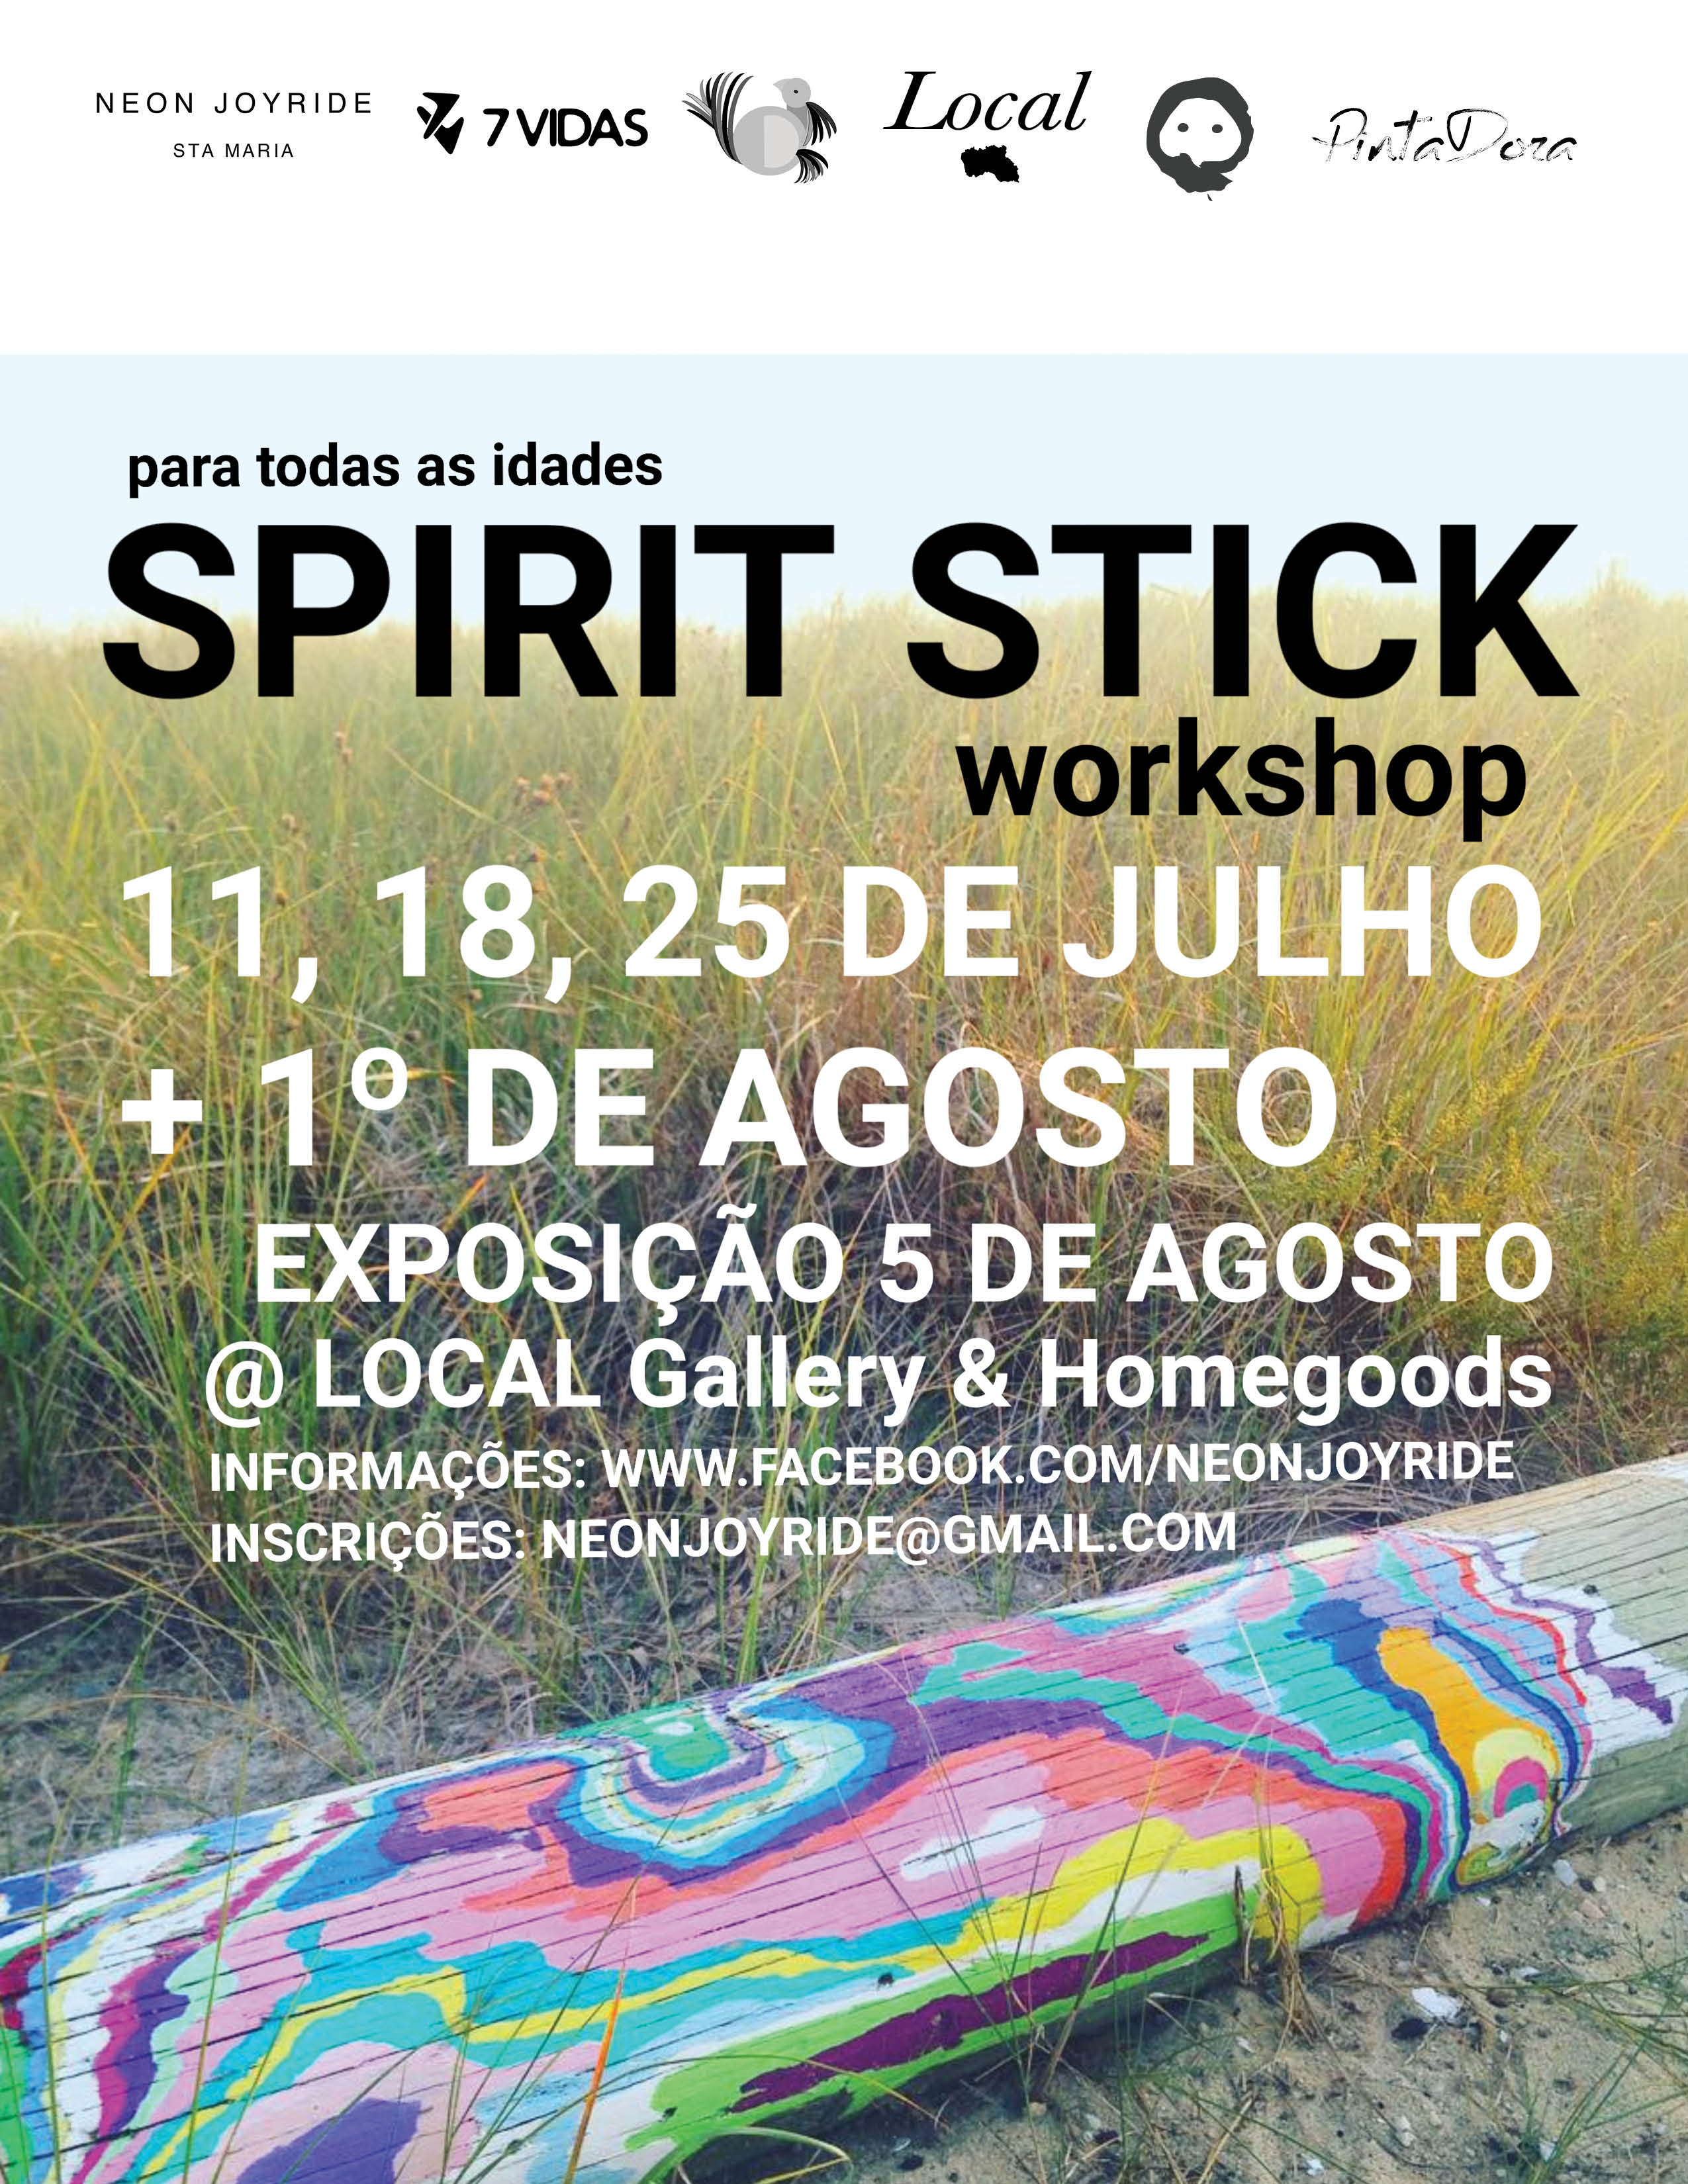 SPIRIT STICK Workshop - Art & Nature, Connecting with our Coastline by Neon Joyride, Monk Santa Maria and Local Santa Maria